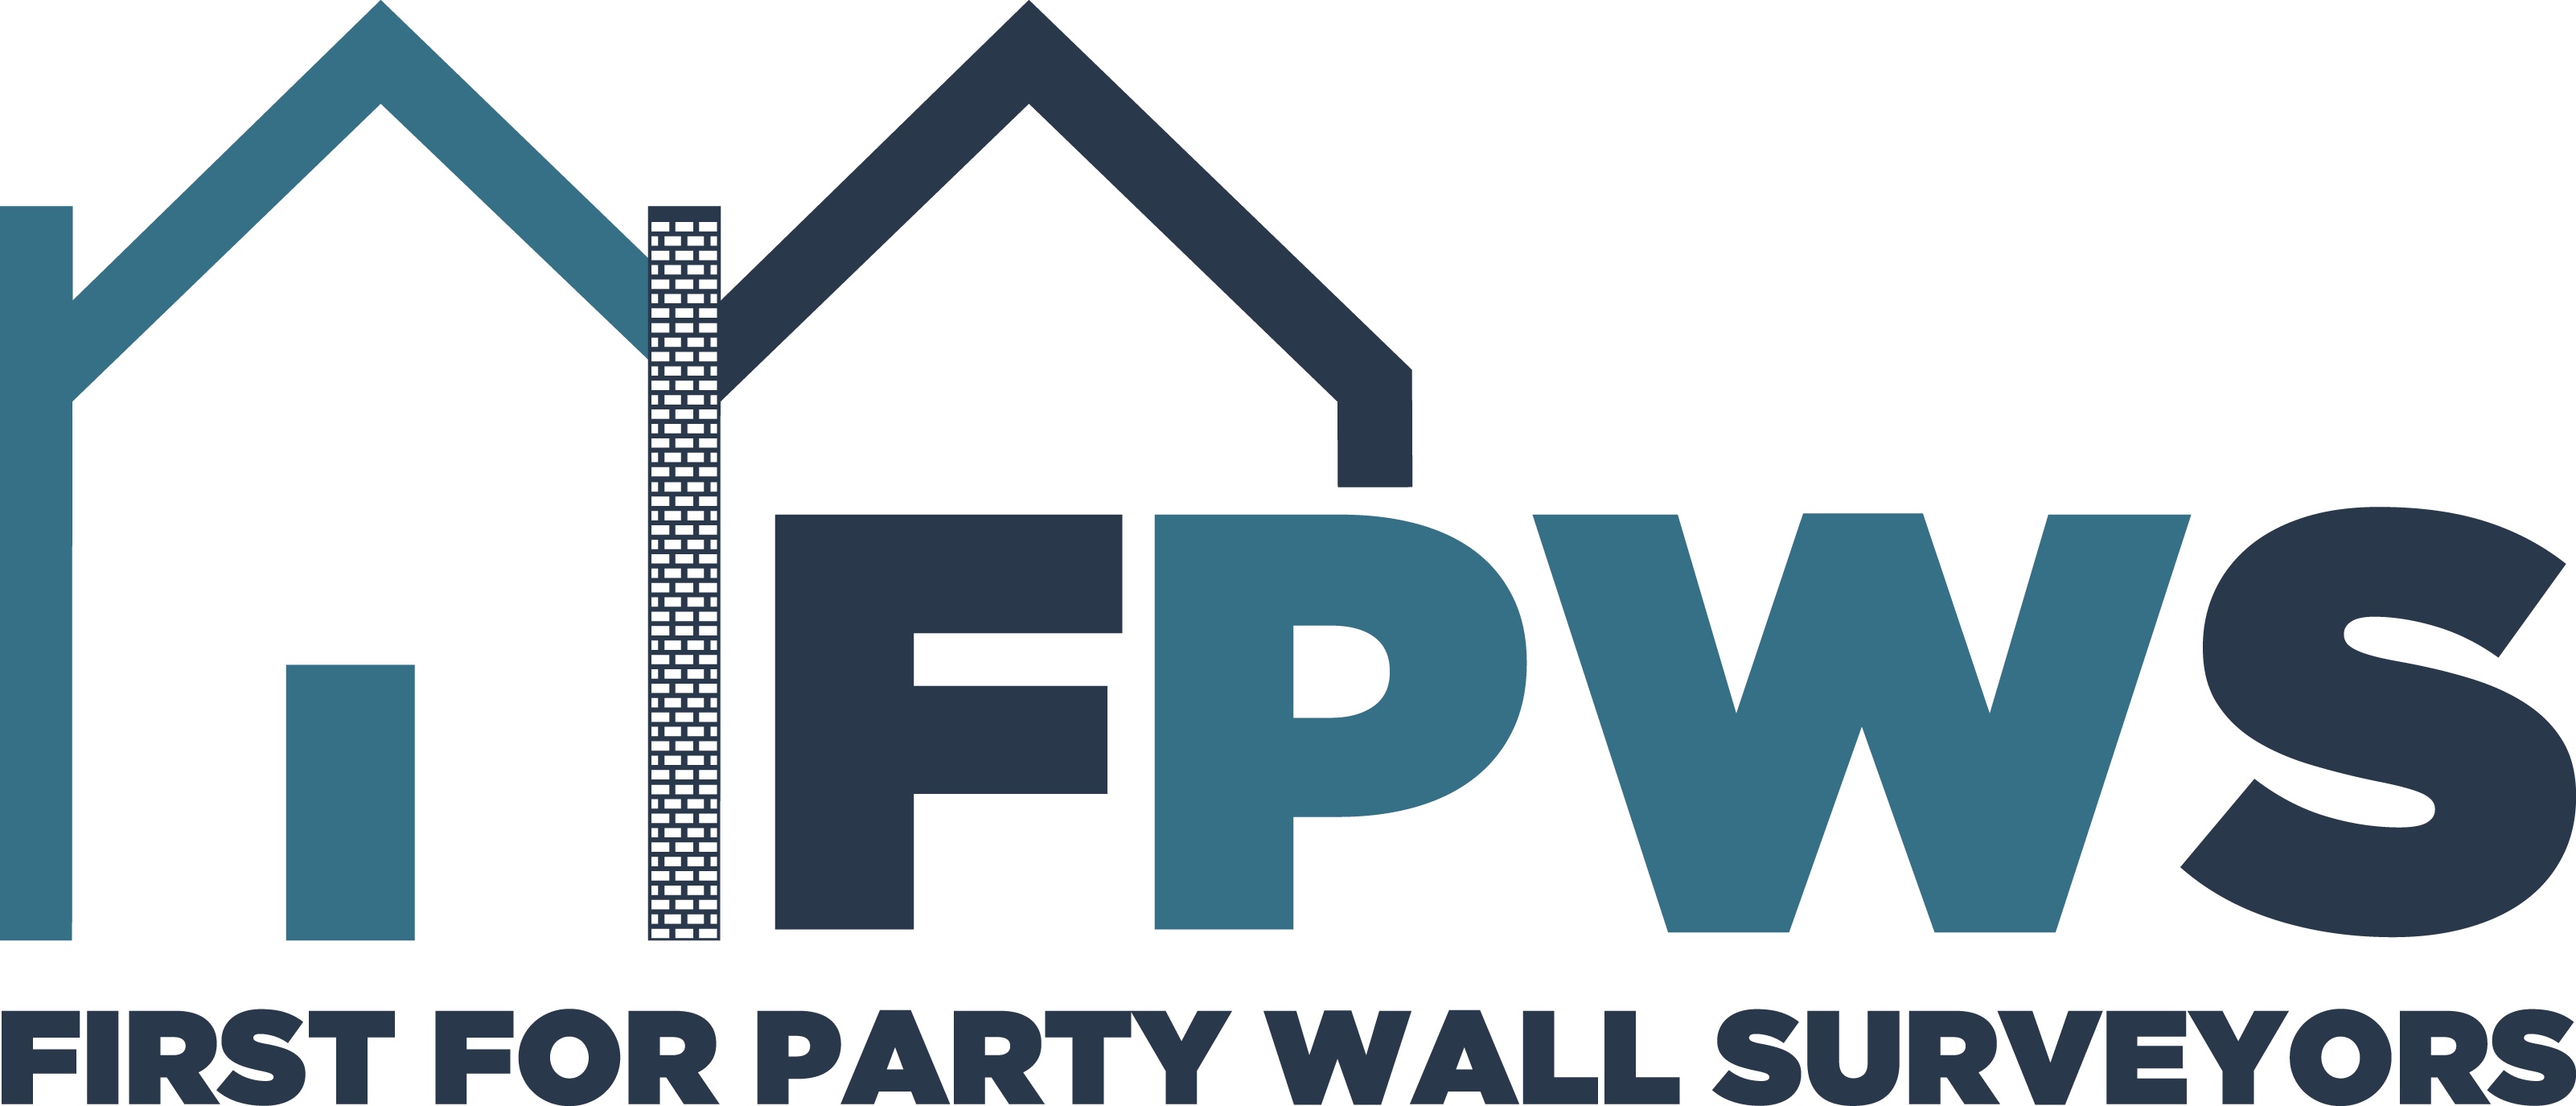 First for Party Wall Surveyors (Thurrock)